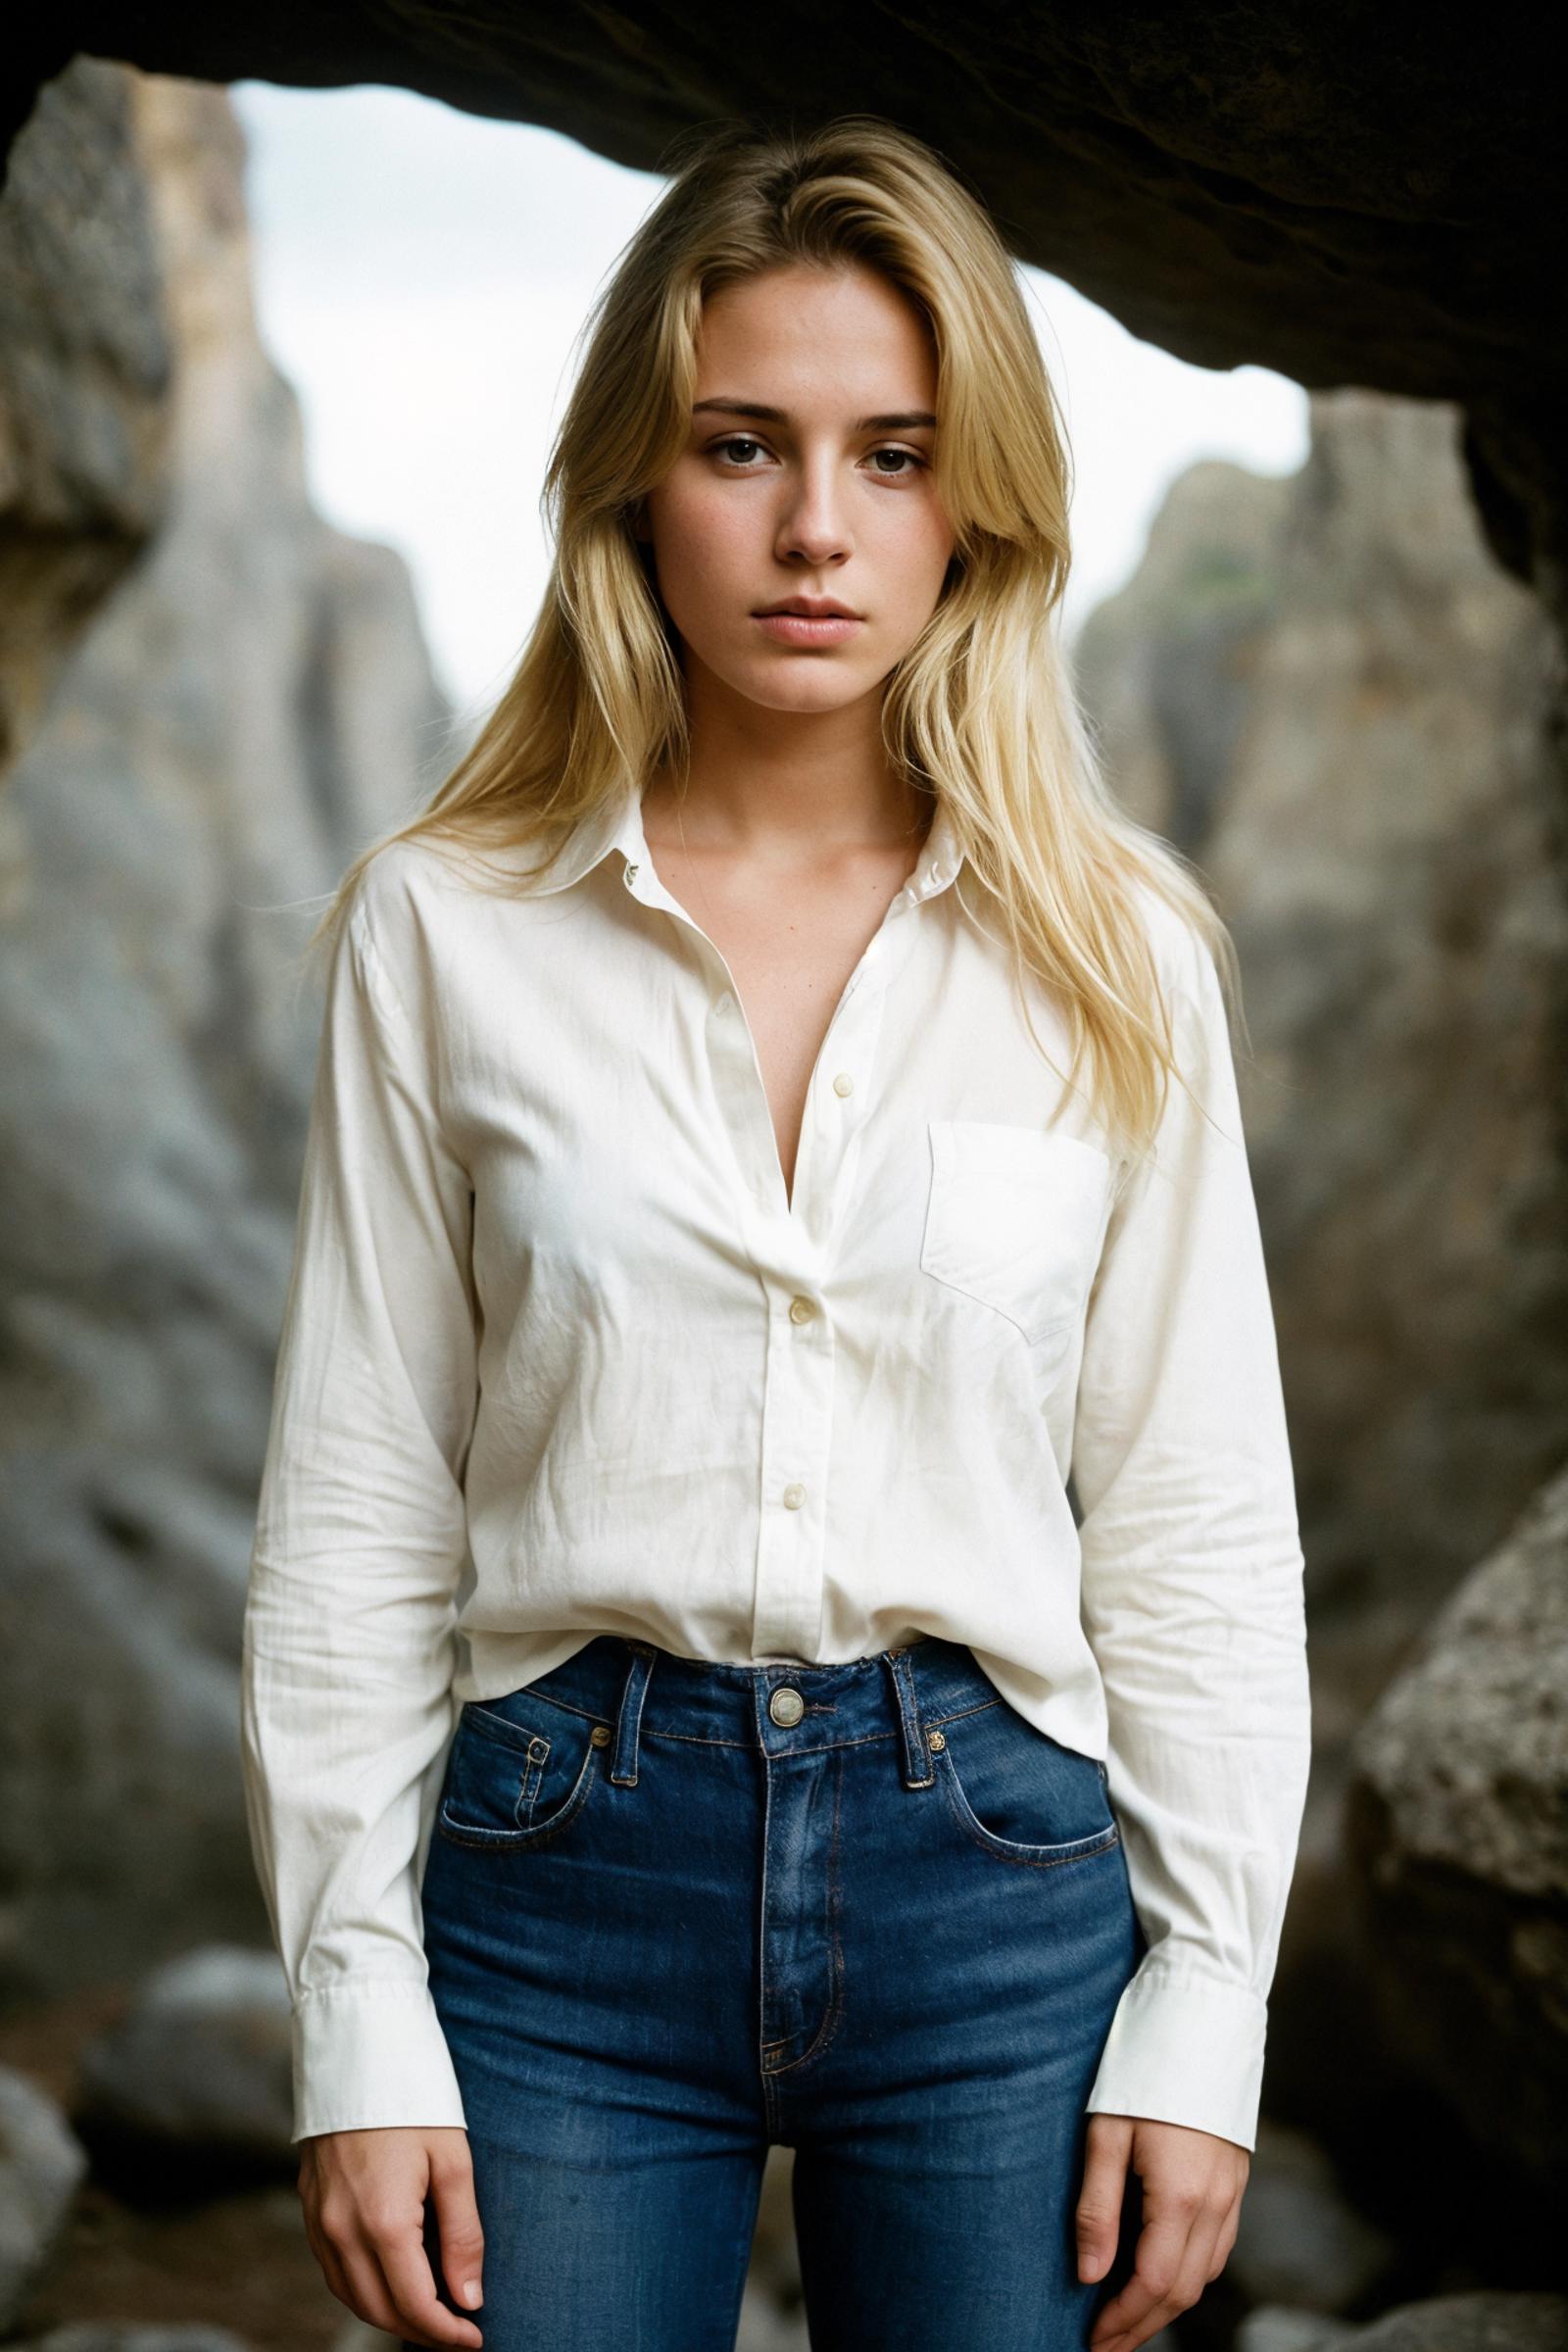 A woman wearing a white shirt and blue jeans.